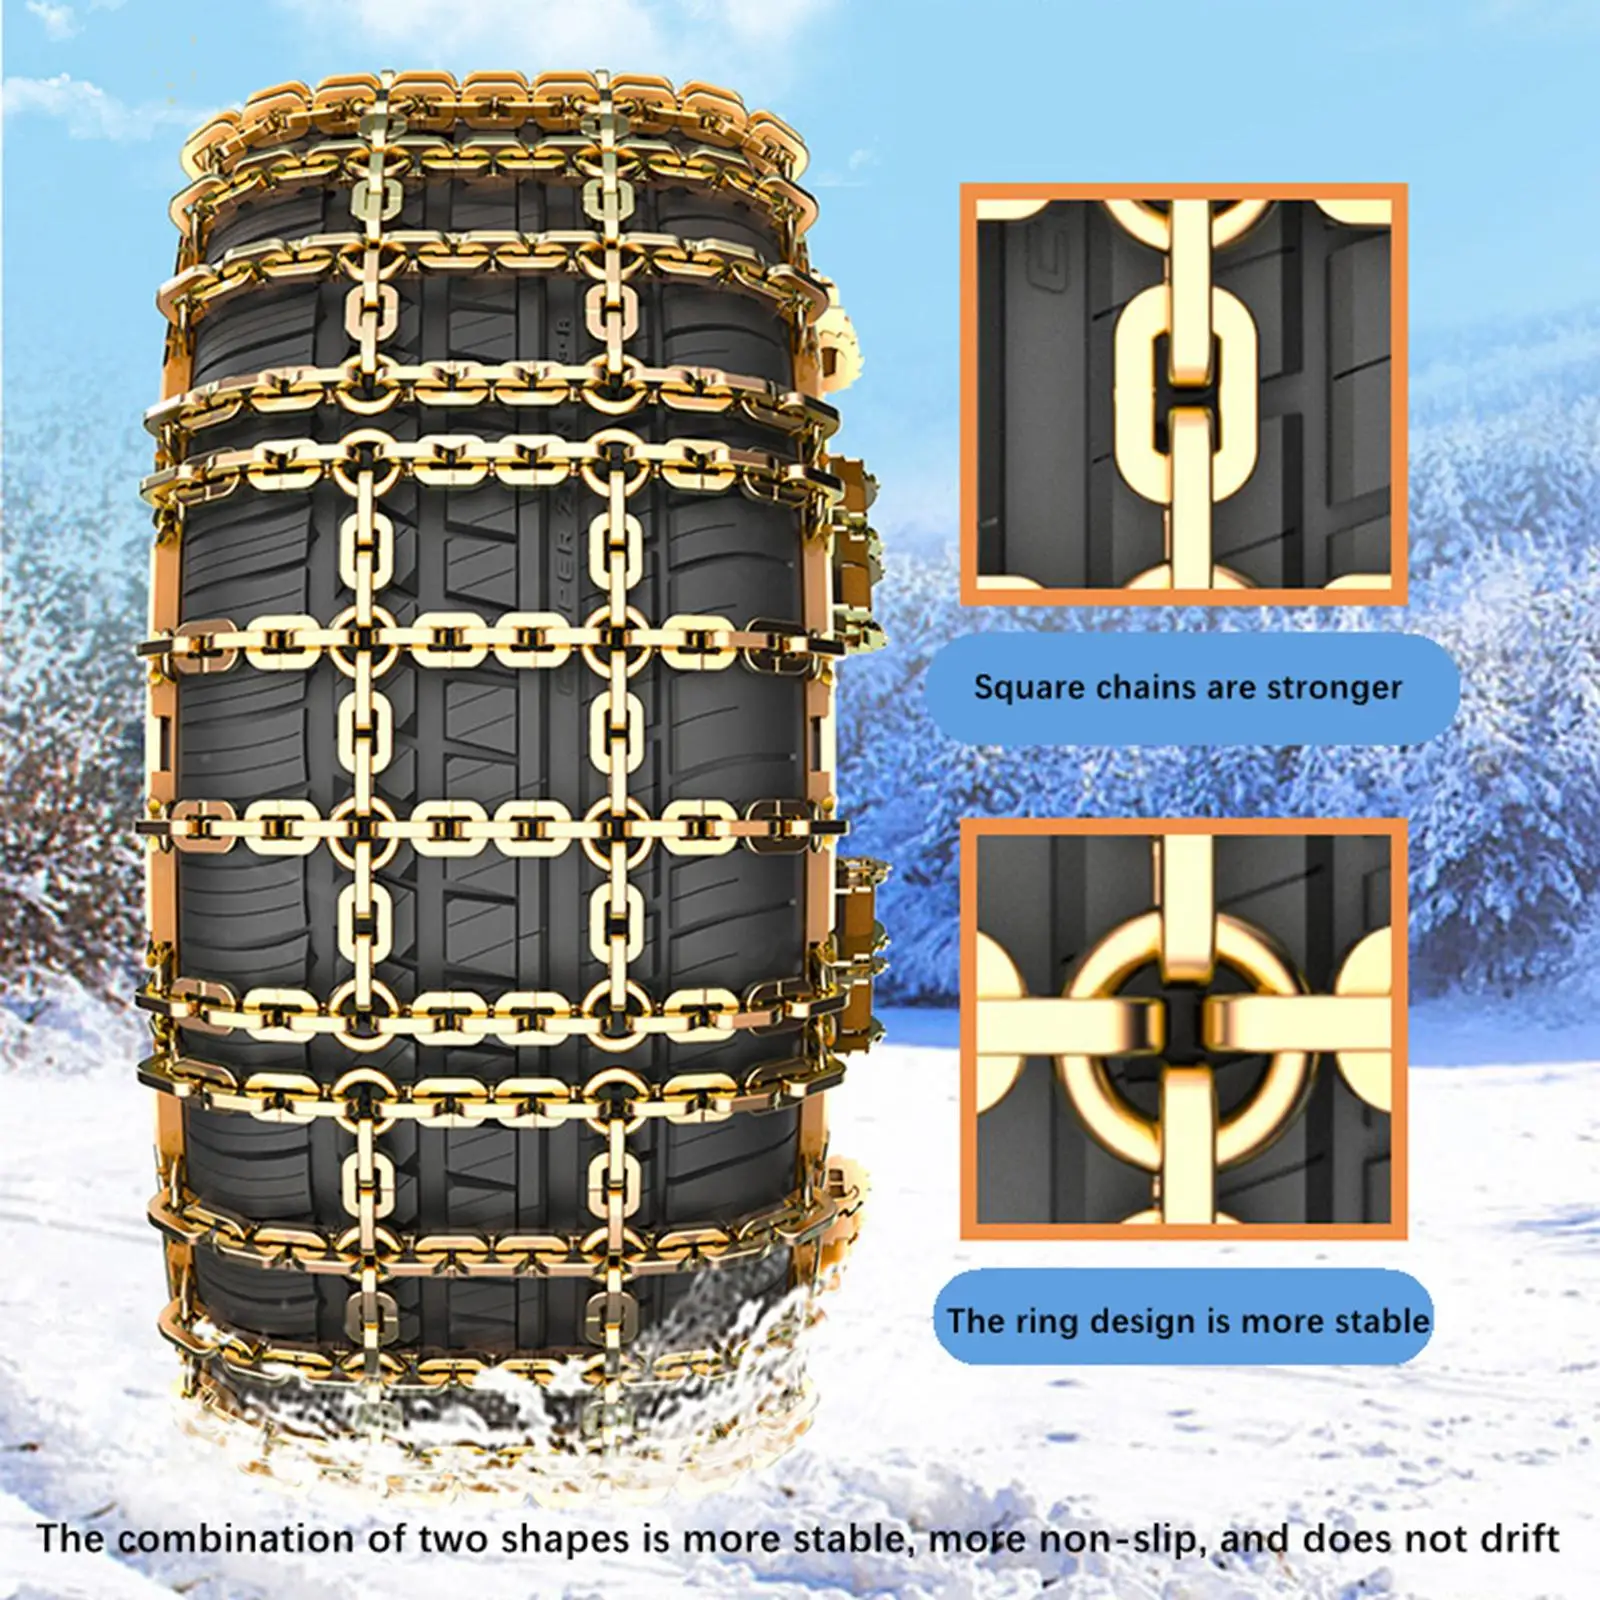 Snow Chain Reusable Car Tire Chain Snow and Ice for Cars Pickups Trucks